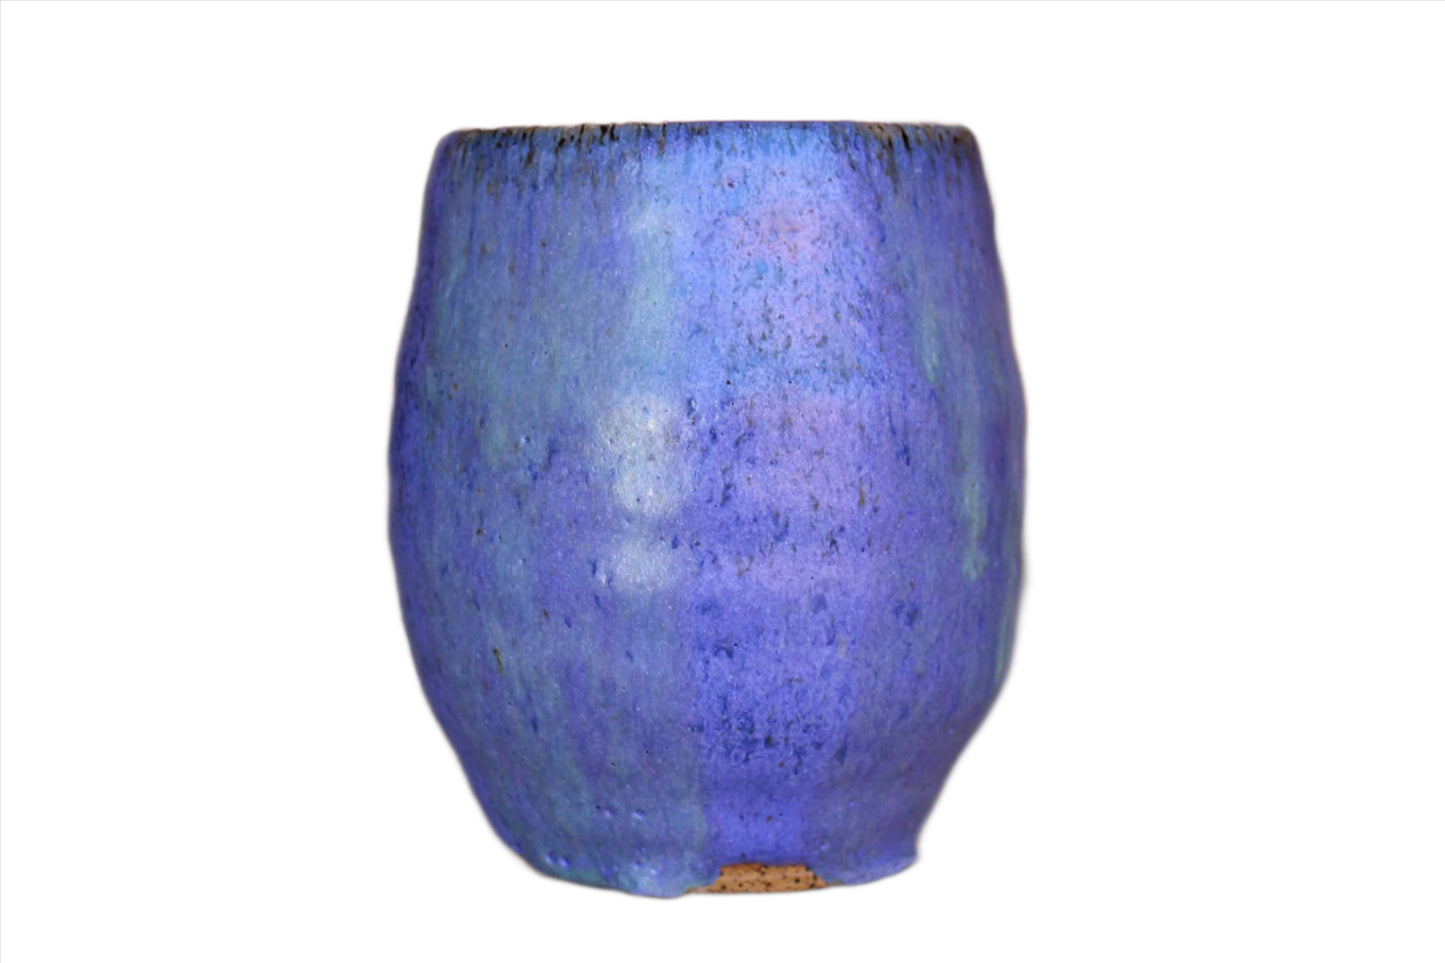 Speckled Blue Stoneware Storage Vessel with Wash of Light Green